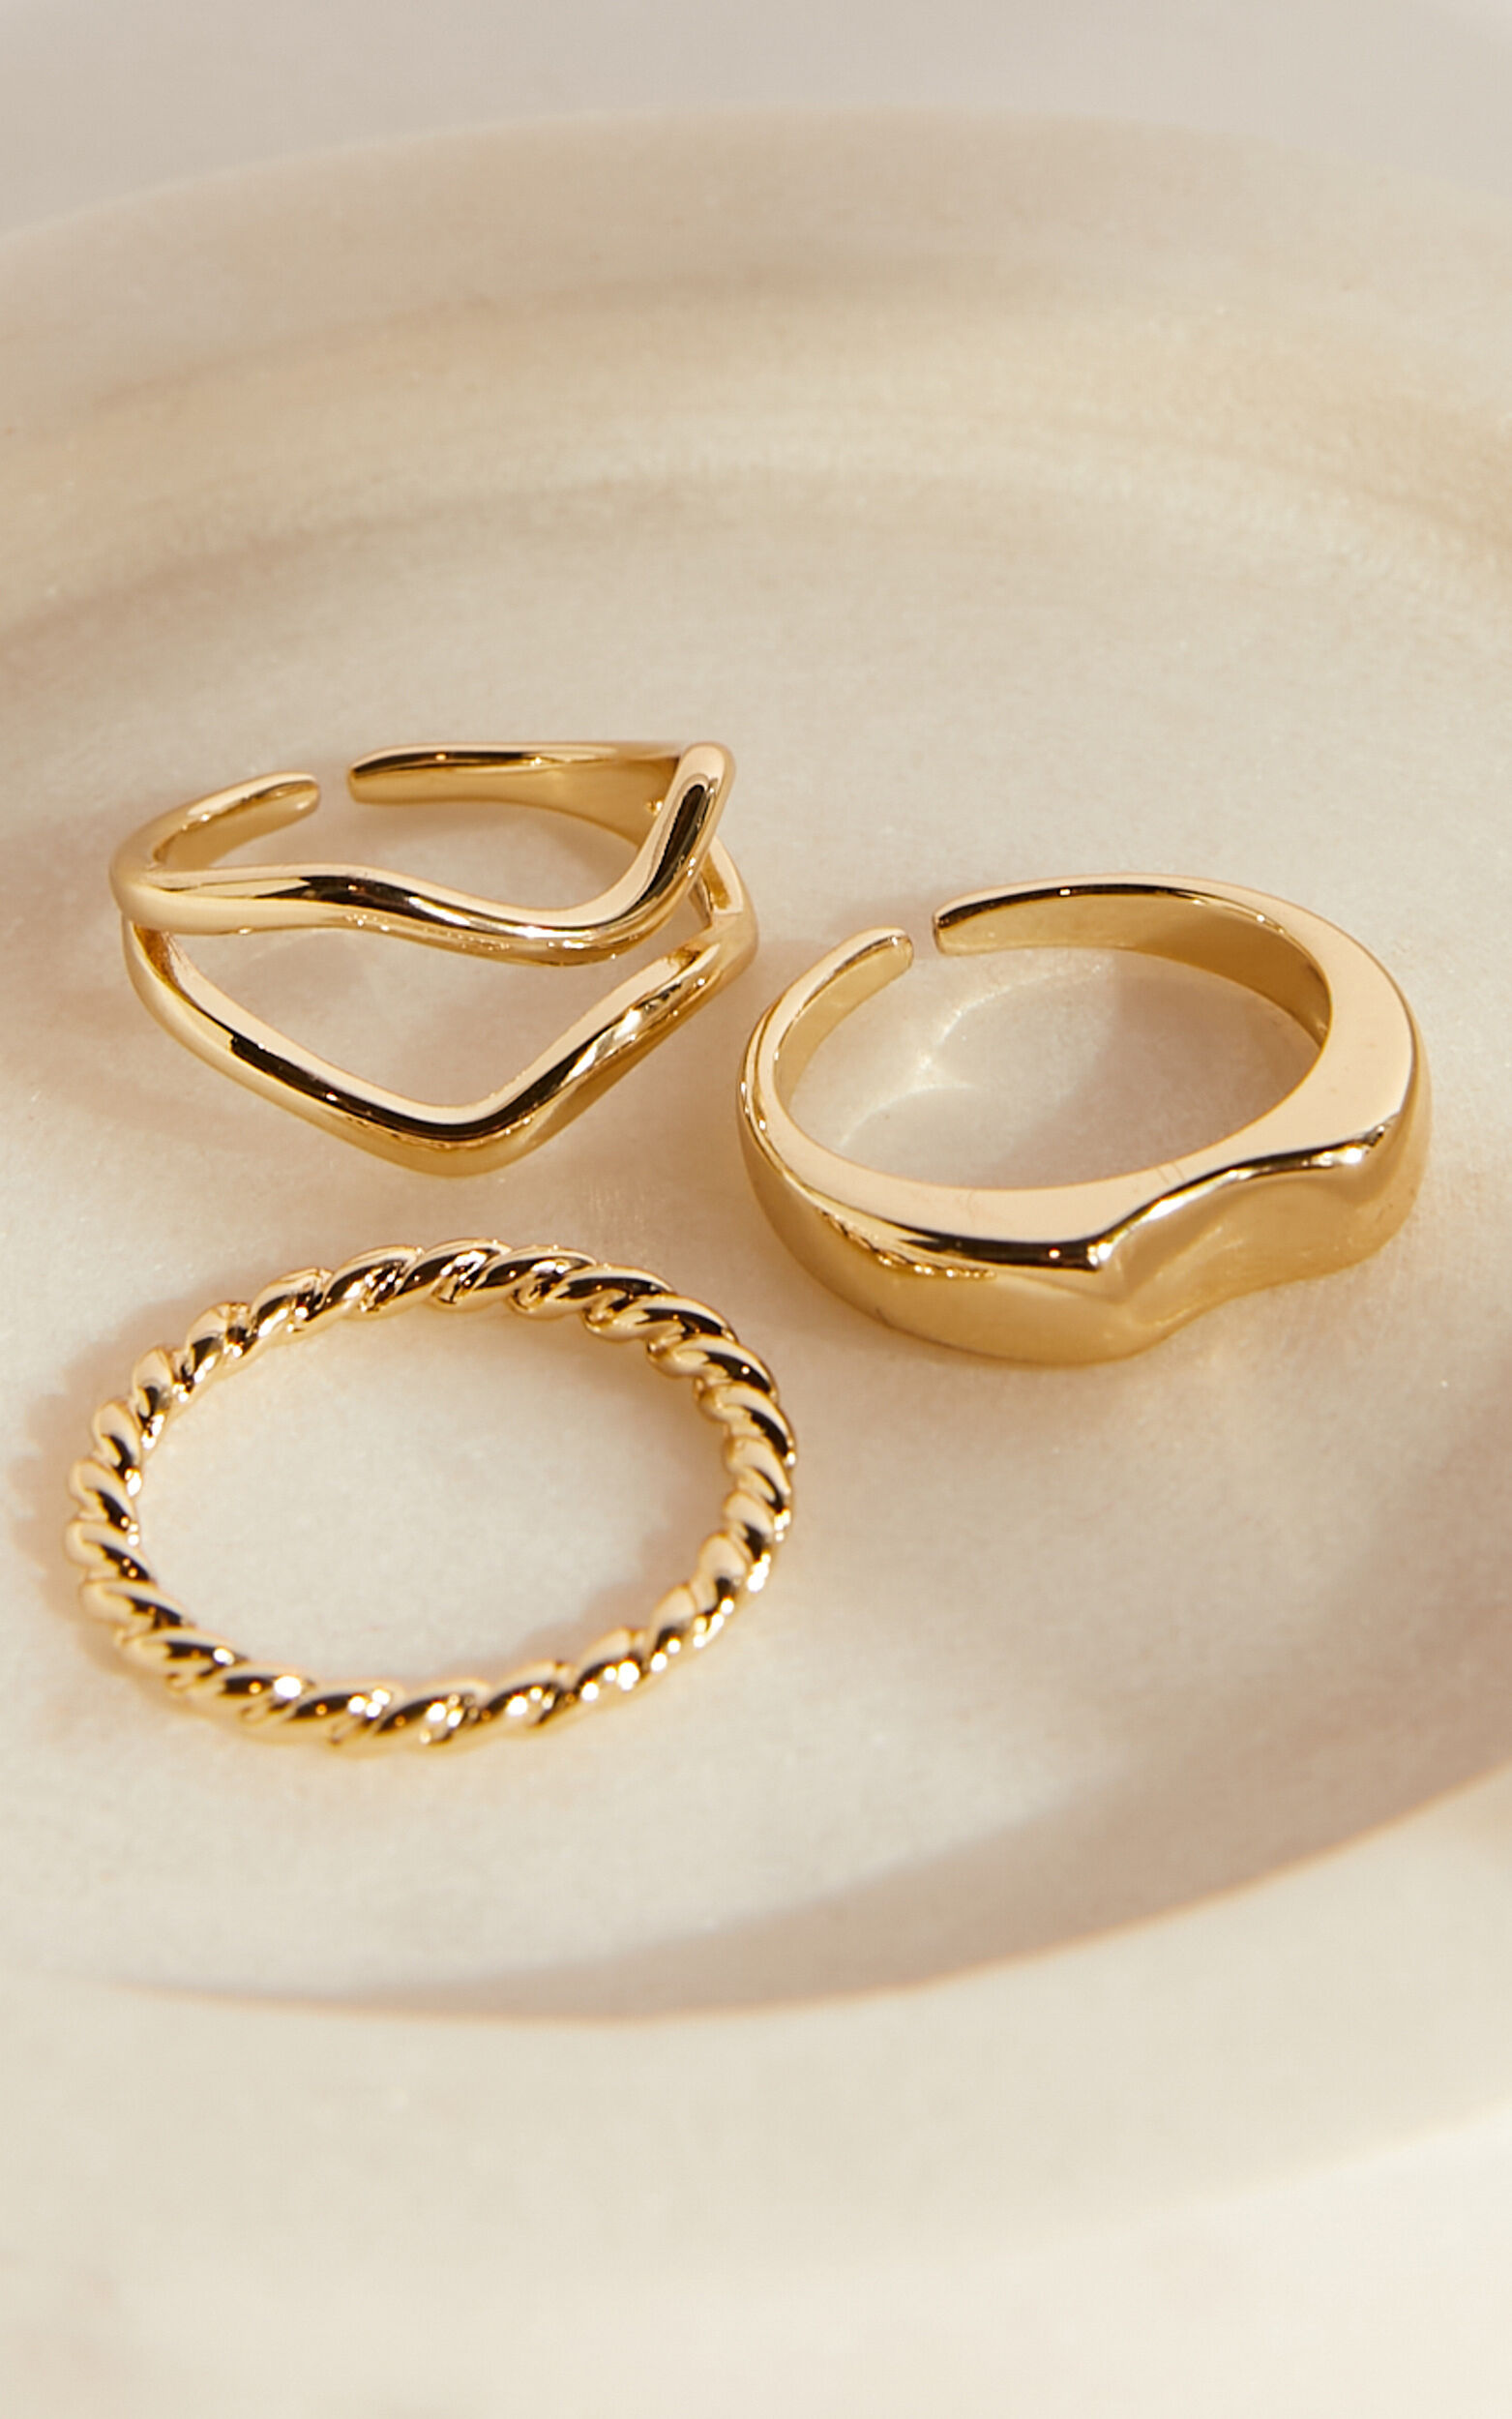 Florice 3 Pack Ring Set in Gold